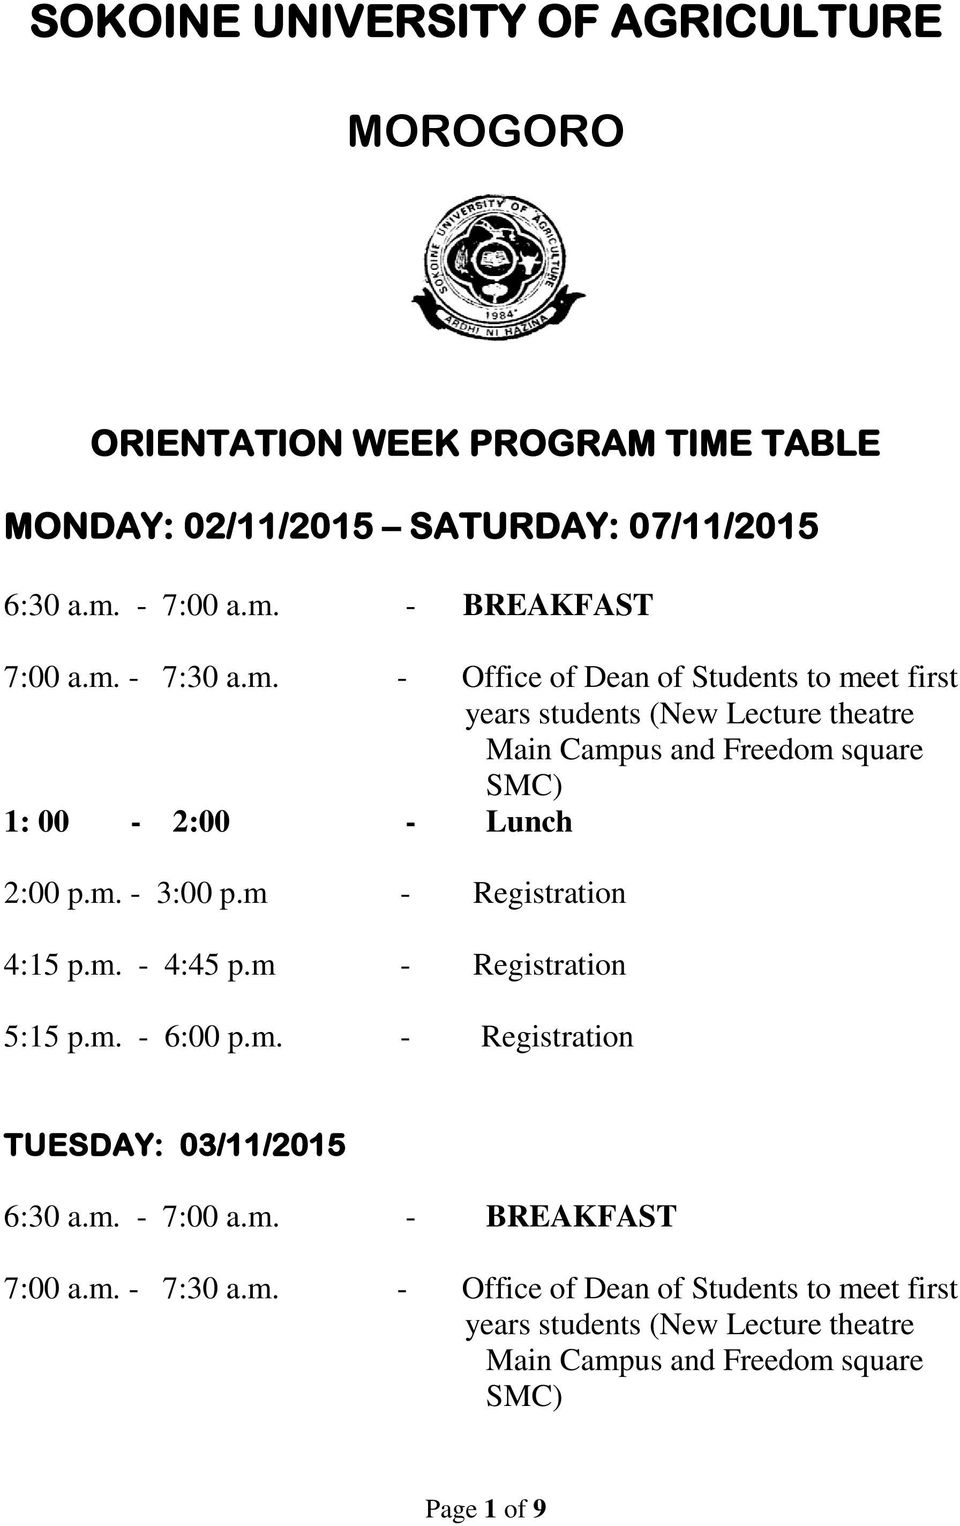 m. - 3:00 p.m - Registration 4:15 p.m. - 4:45 p.m - Registration 5:15 p.m. - 6:00 p.m. - Registration TUESDAY: 03/11/2015 6:30 a.m. - 7:00 a.m. - BREAKFAST 7:00 a.